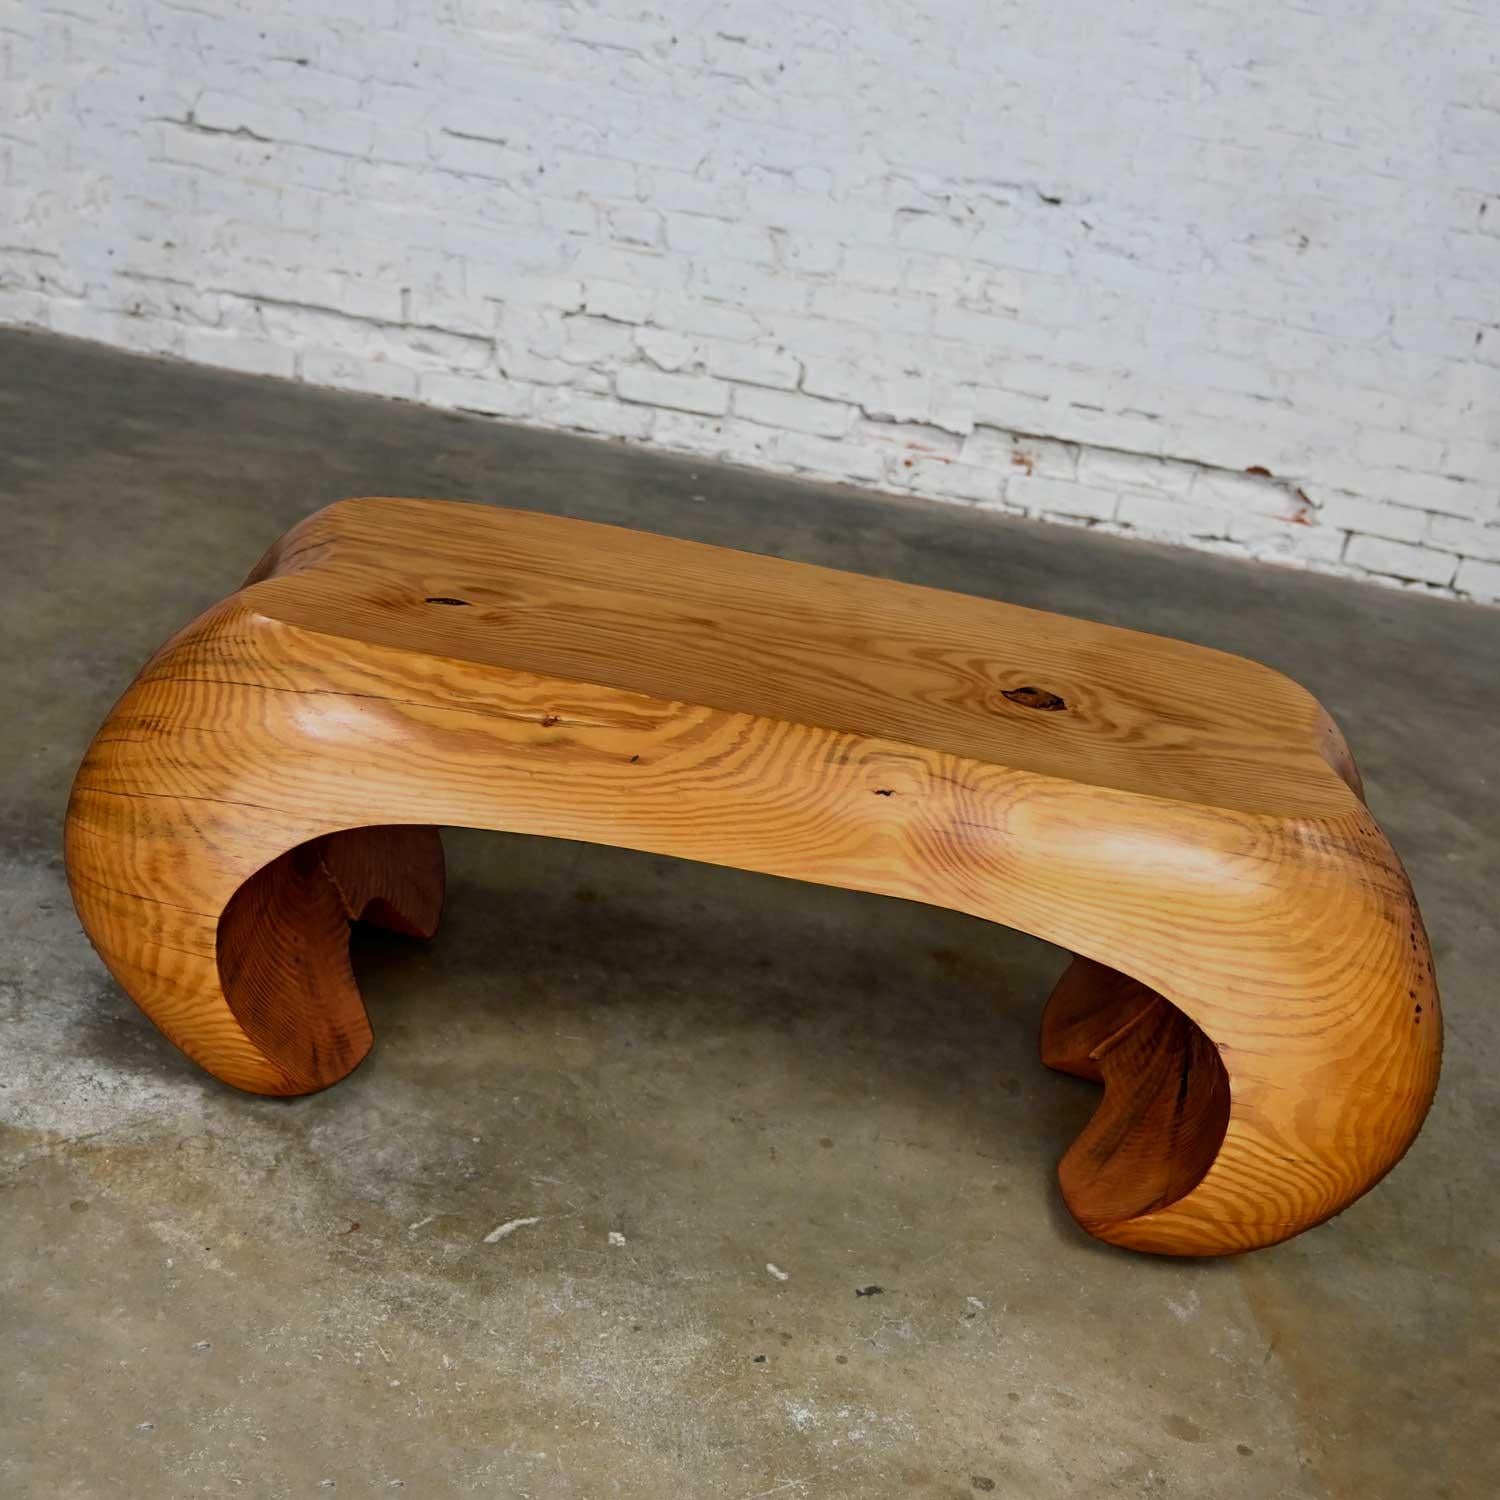 Fabulous postmodern natural sculpted solid pine heartwood bench or coffee table in the style of Carl Gromoll or Wendell Castle. Beautiful condition, keeping in mind that this is vintage and not new so will have signs of use and wear. Please see